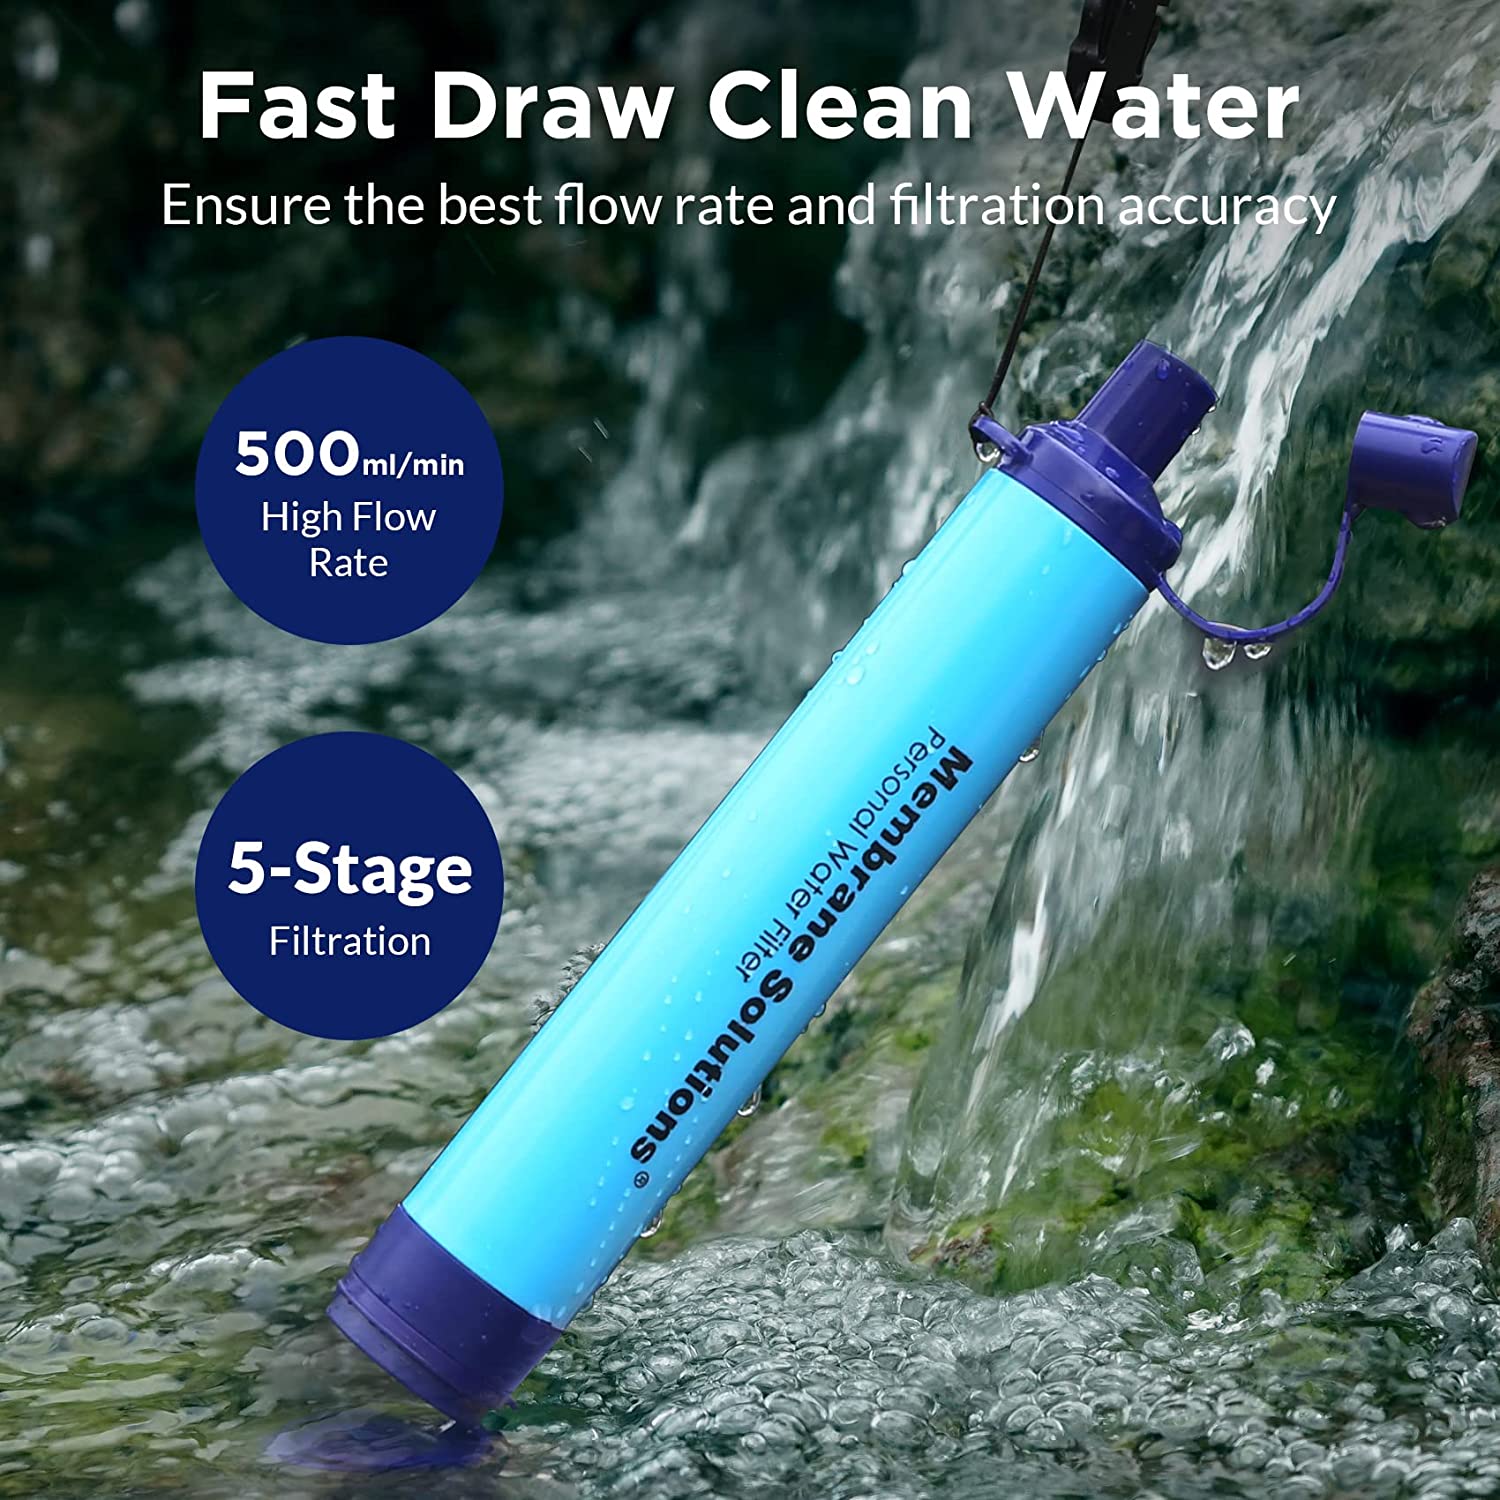 LifeStraw Personal Water Filter  Water Filters & Purifiers For Sale